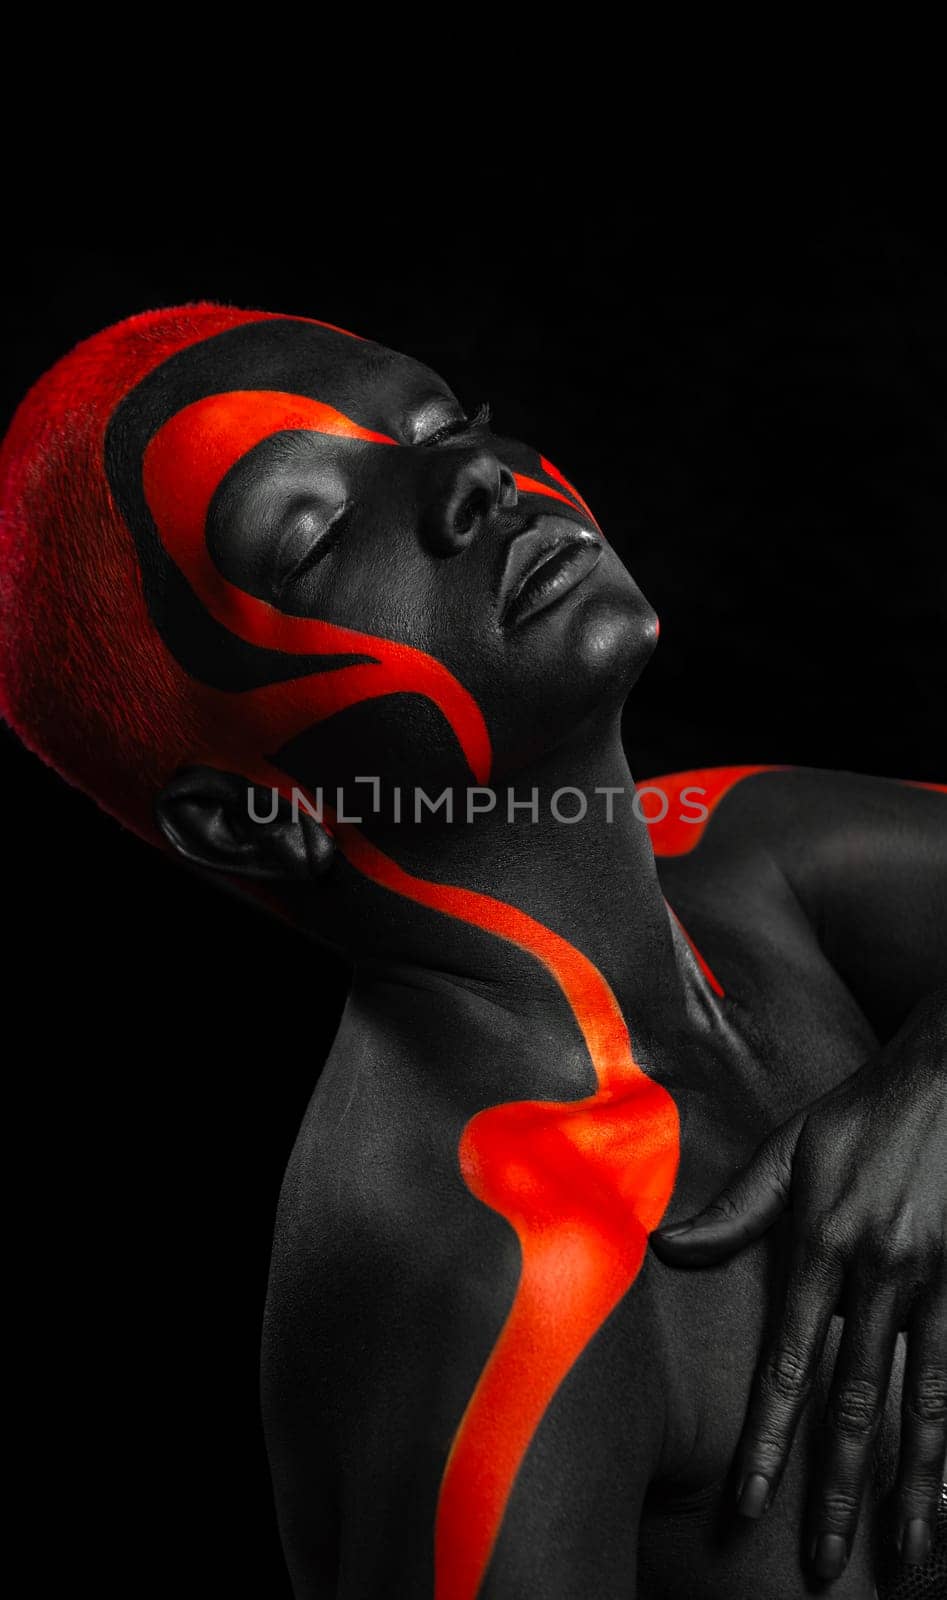 The Art Face. How To Make A Mixtape Cover Design - Download High Resolution Picture with Black and yellow body paint on african woman for your Music Song. Create Album Template with Creative Image